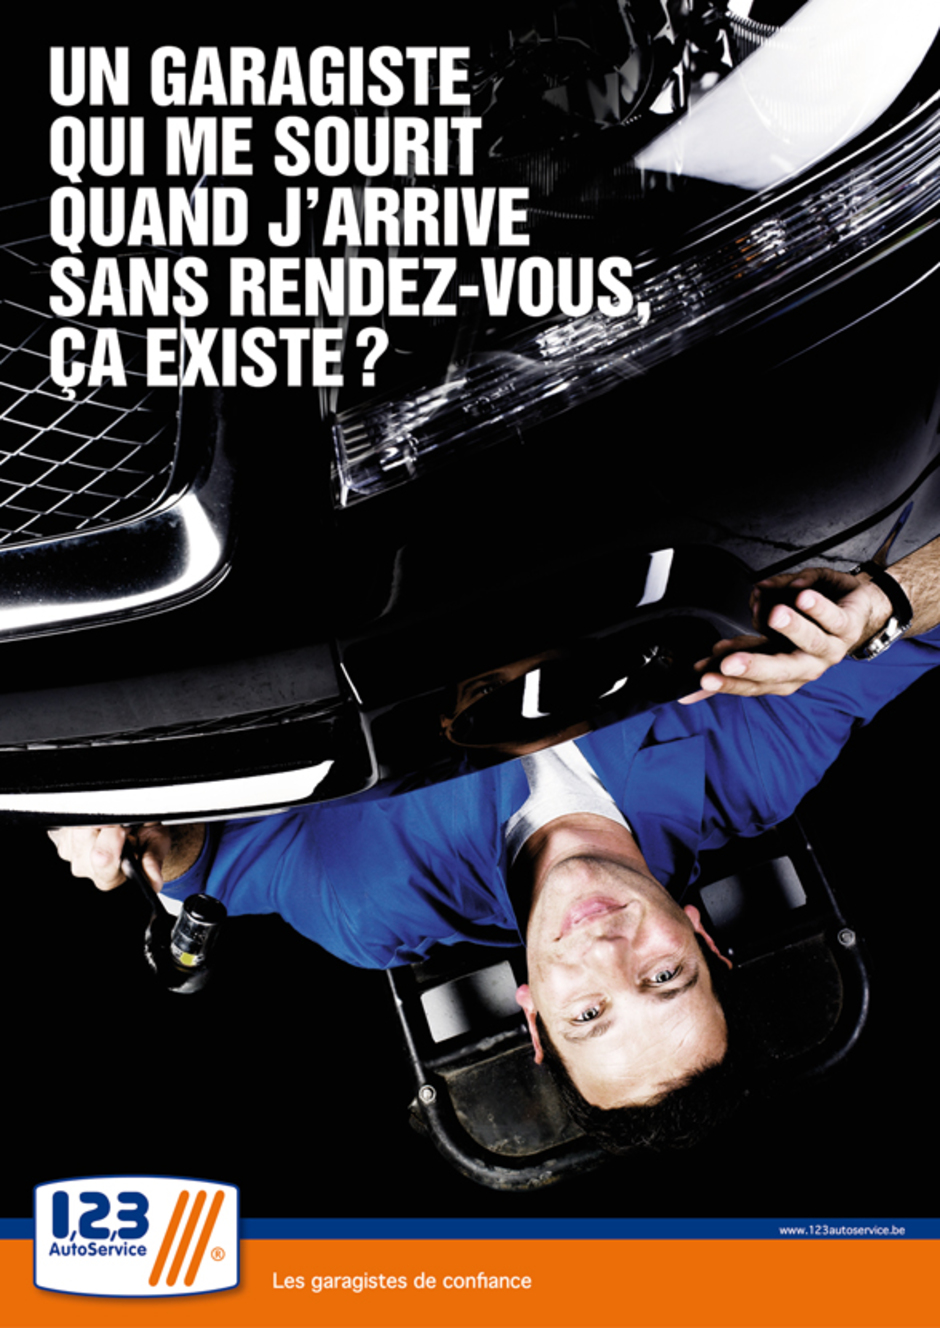 1, 2, 3 AutoService, ad, poster